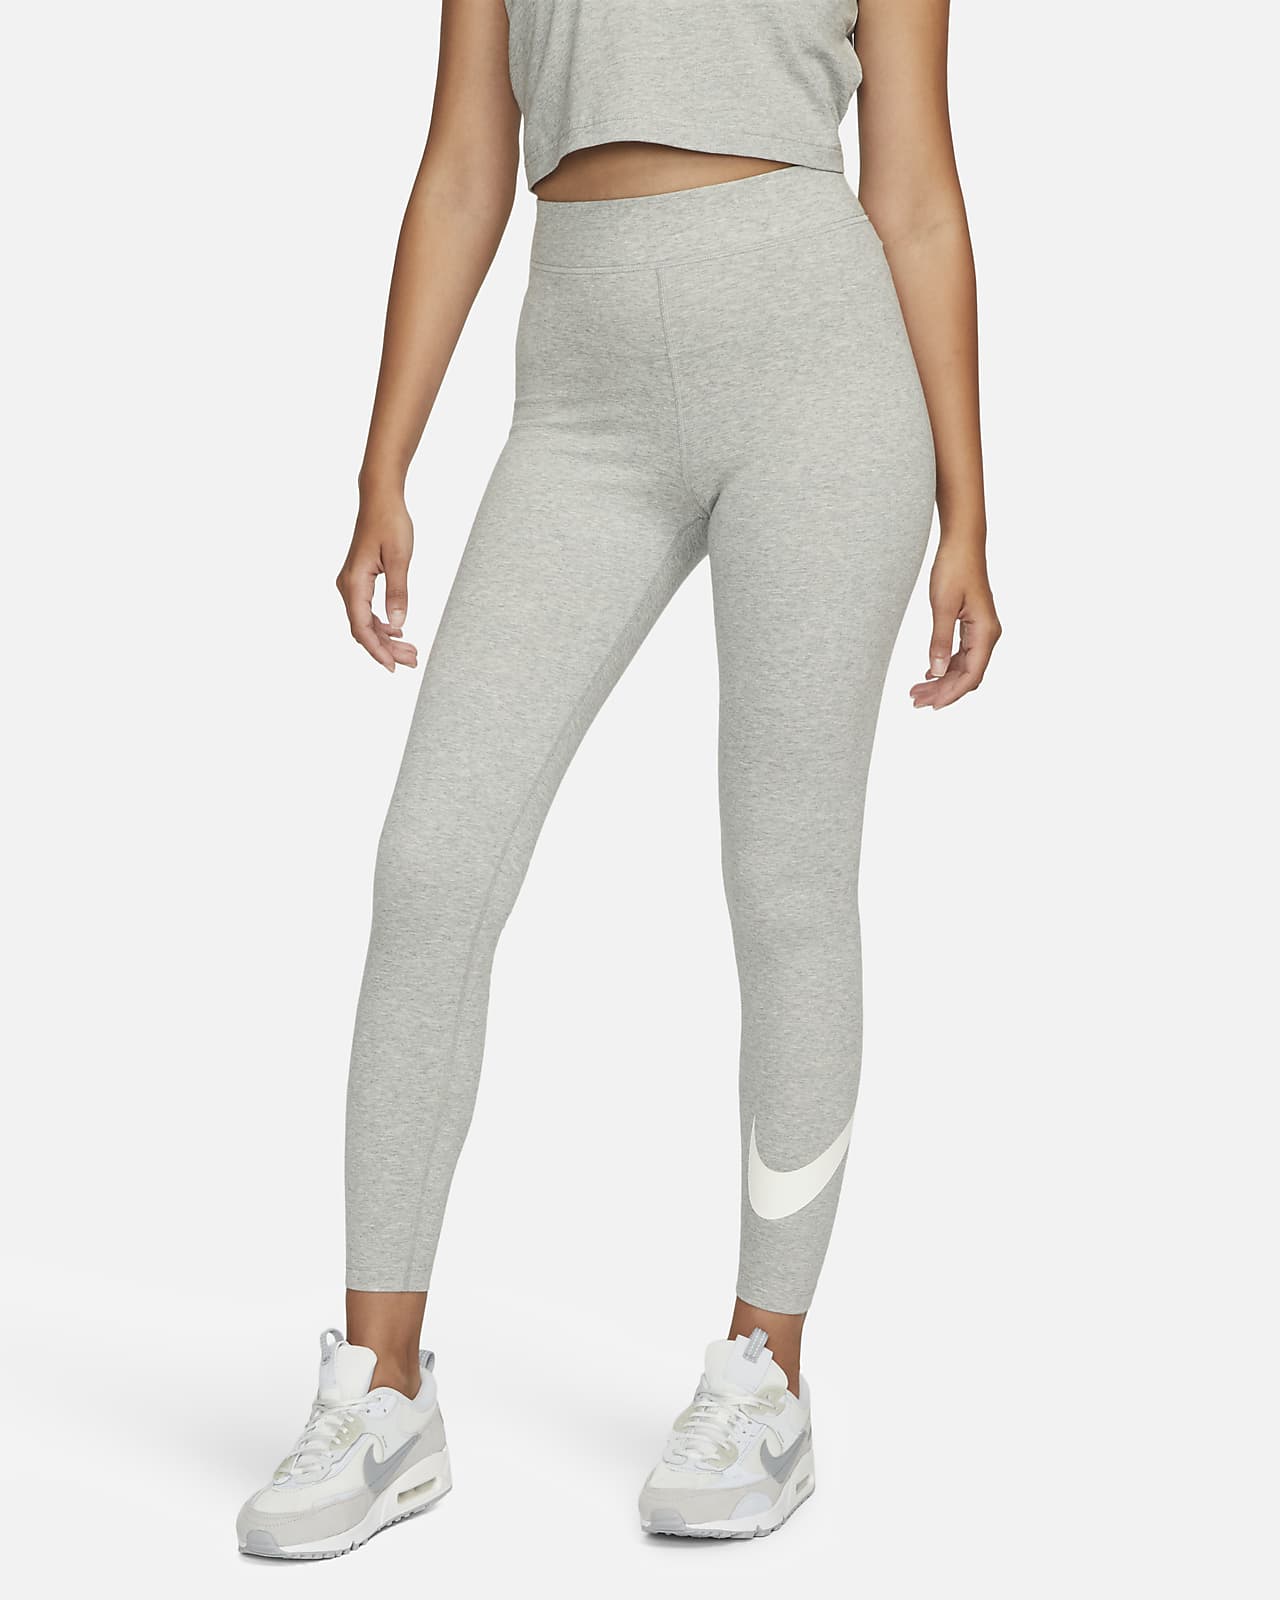 Last chance Volleyball Tights & Leggings. Nike SI